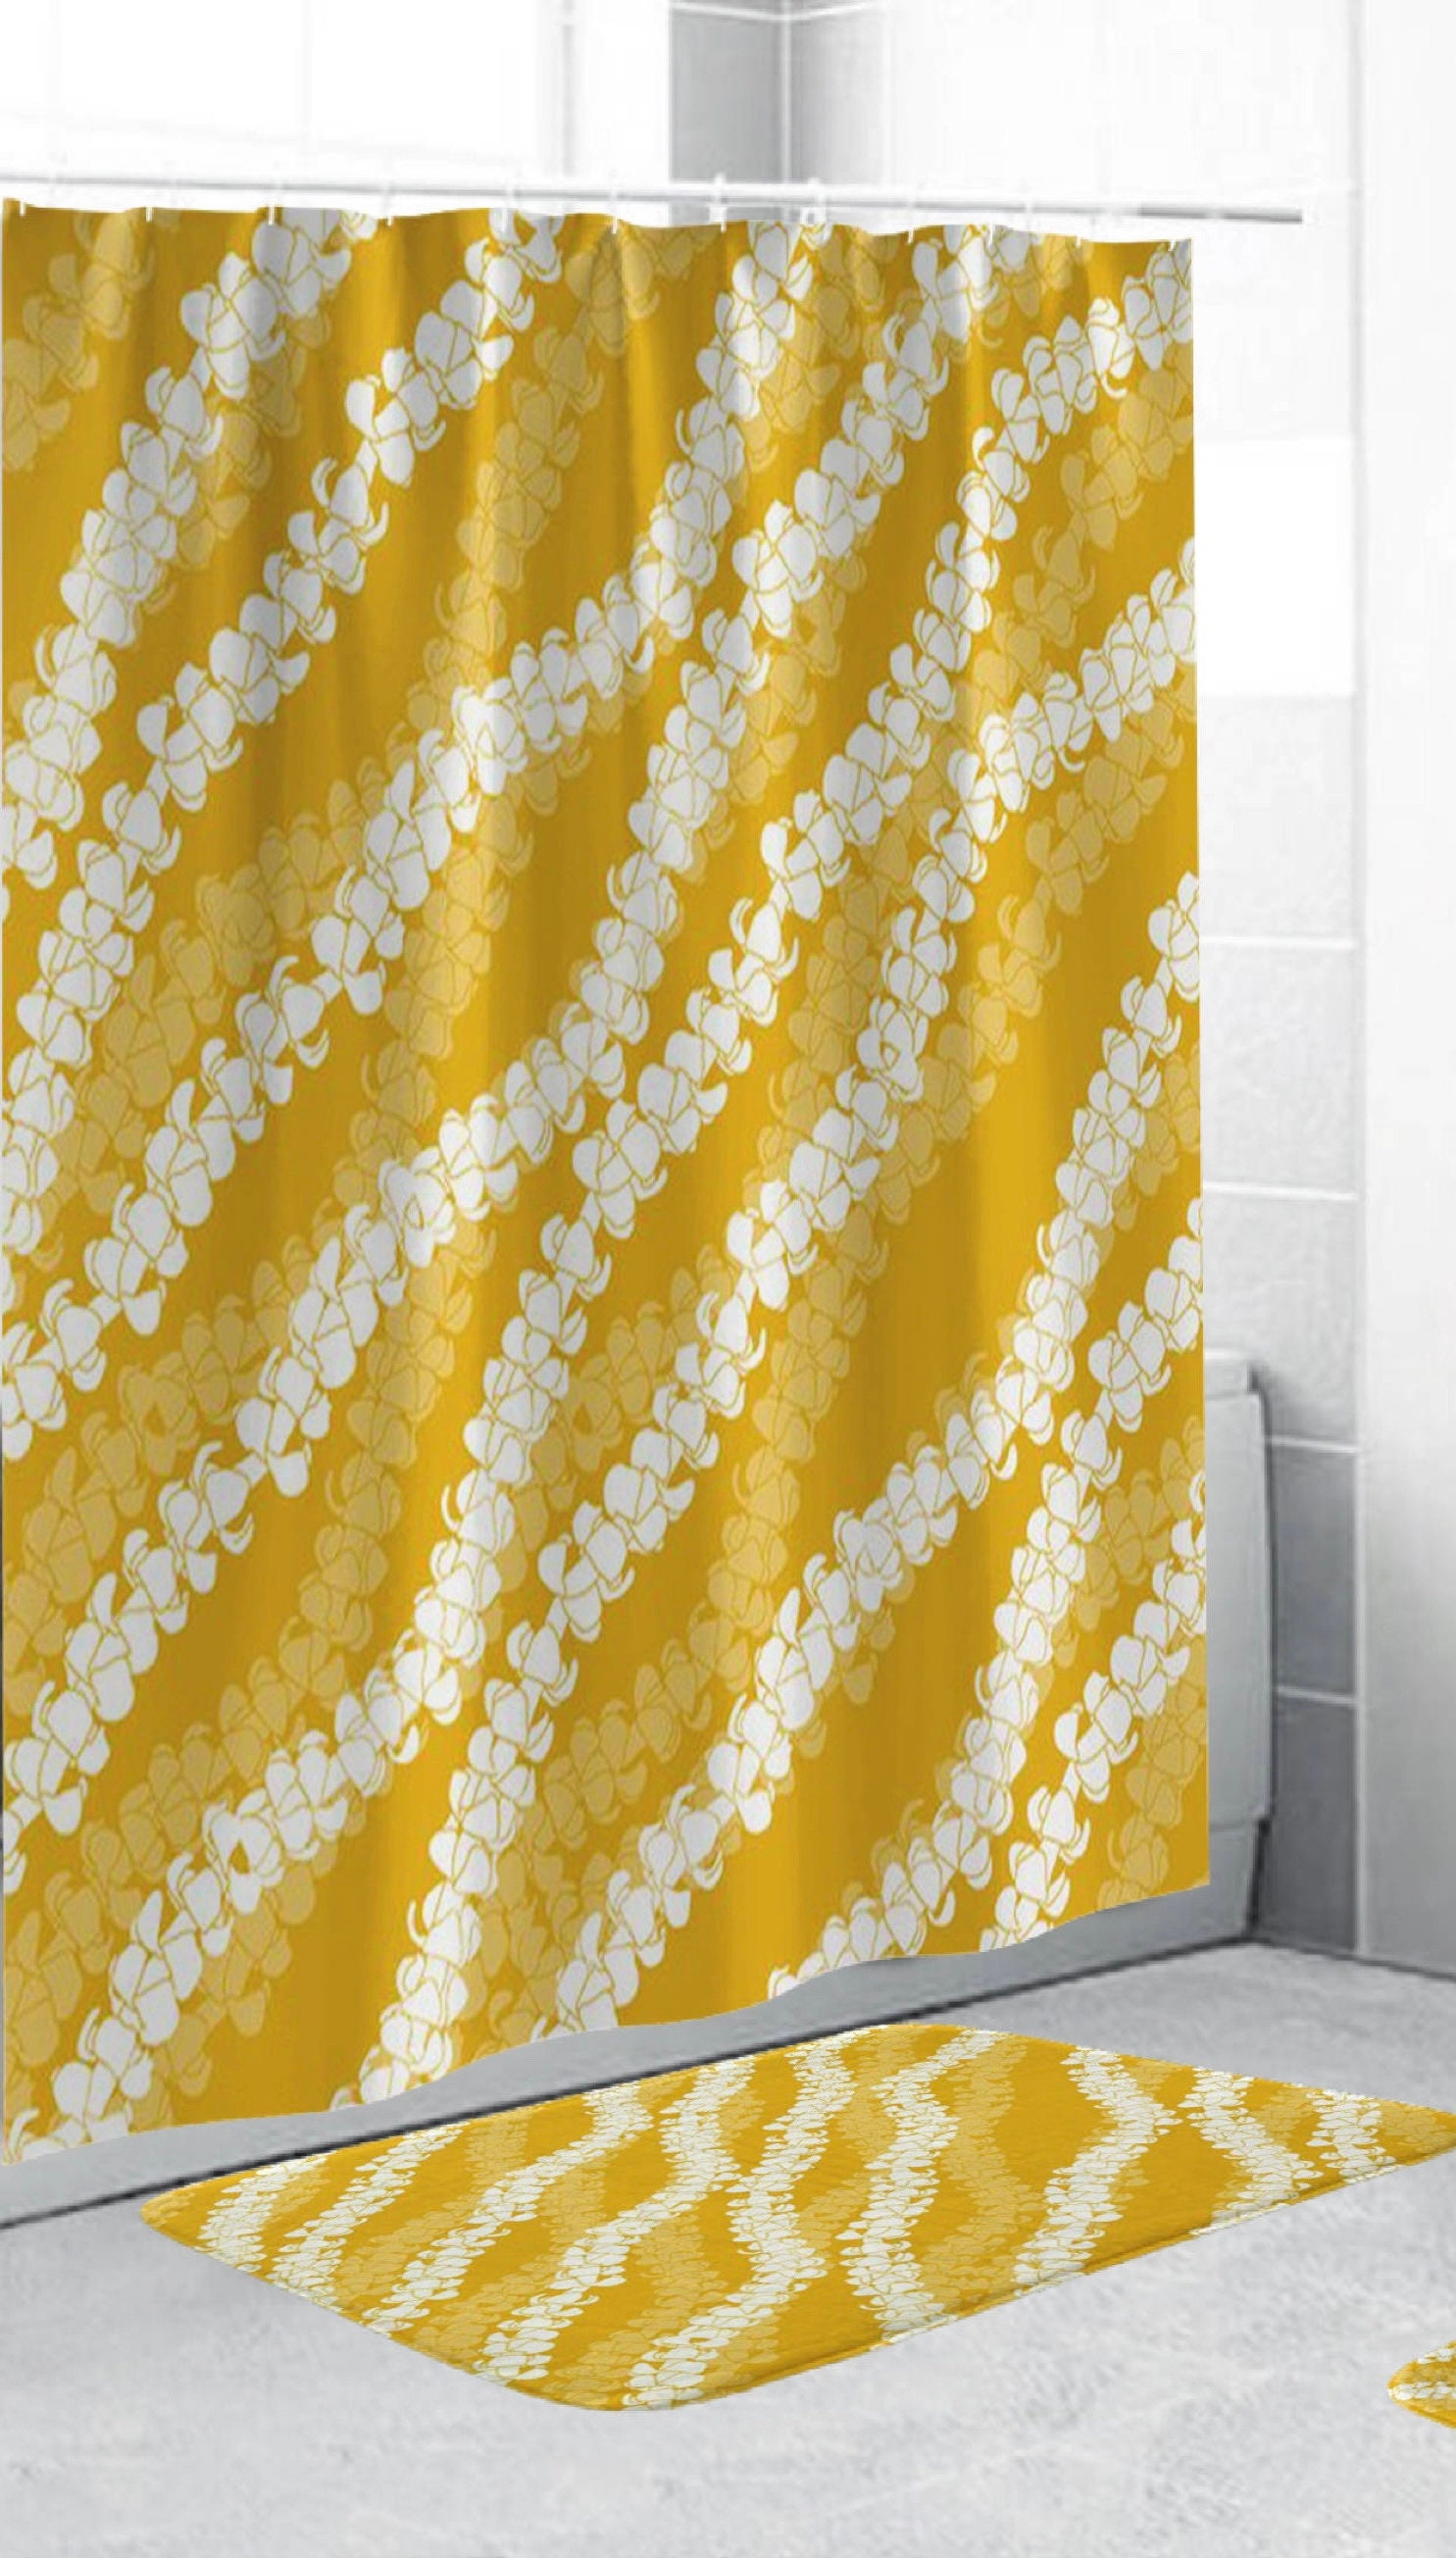 CHARMHOME 4 Piece Shower Curtain Sets with Non-Slip Rug, Toilet Lid Cover,  Bath Mat and 12 Hooks,Fins On The Sea Level Waterproof Bathroom Curtains